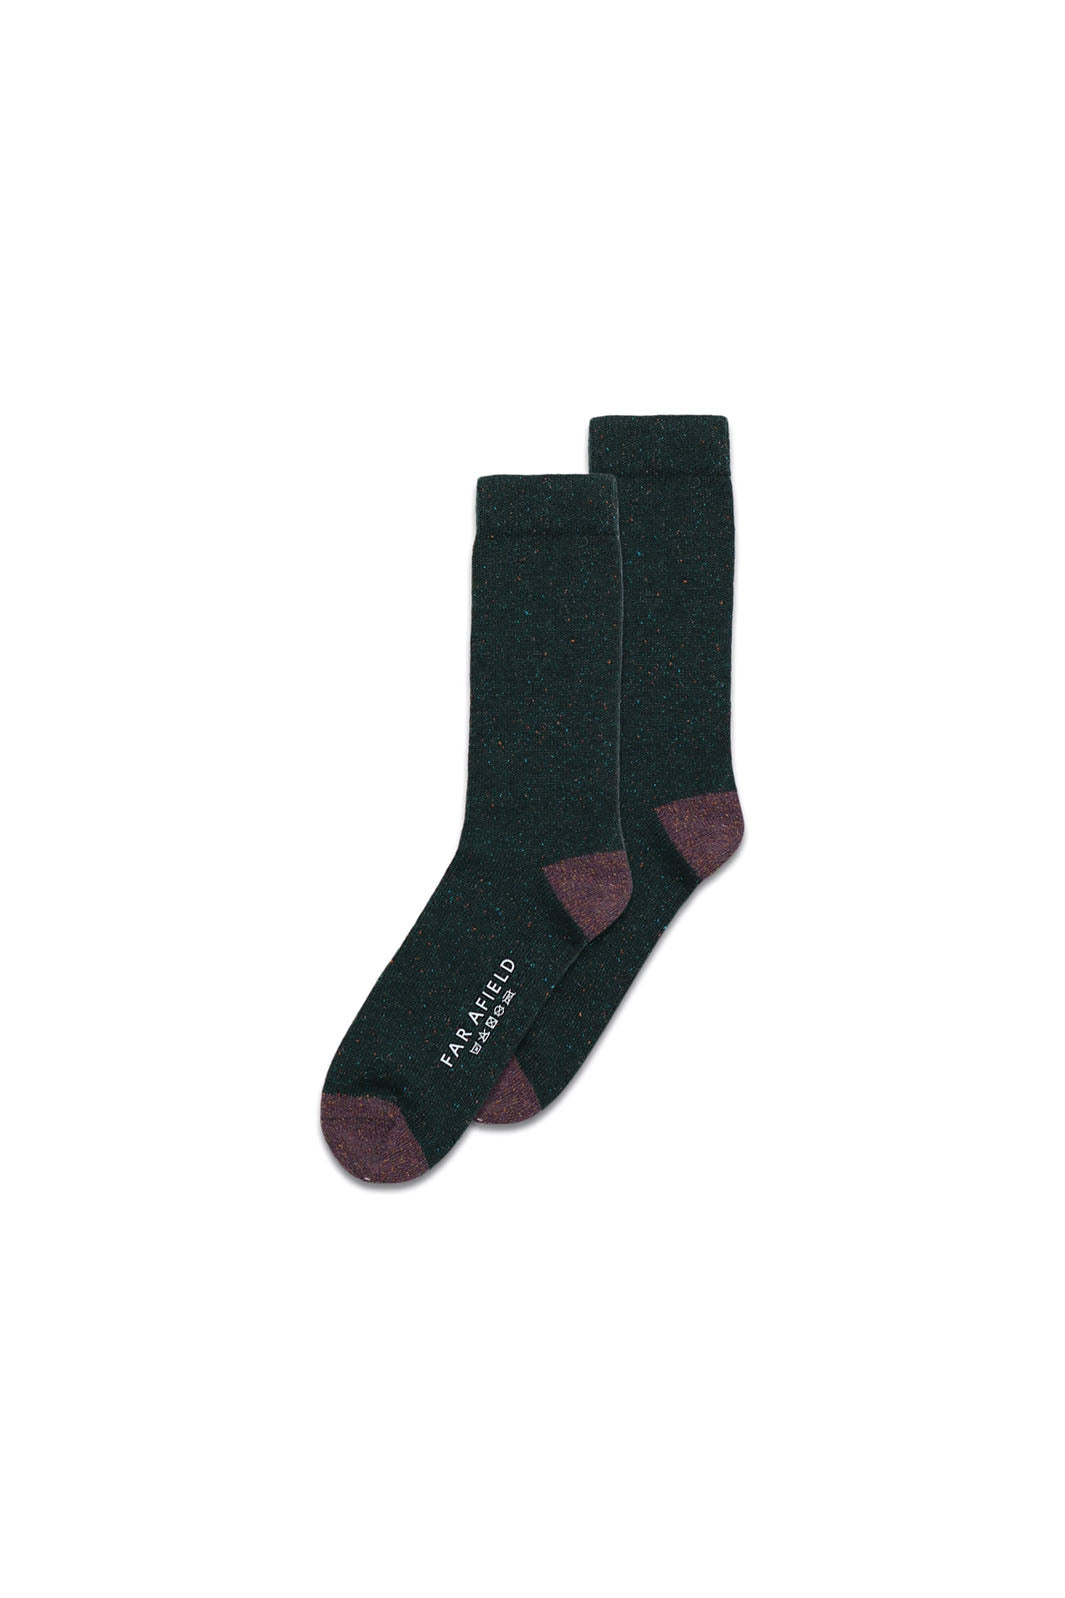 Deep teal socks with flecks of texture and color and a burgundy brown heel and toe color block. 